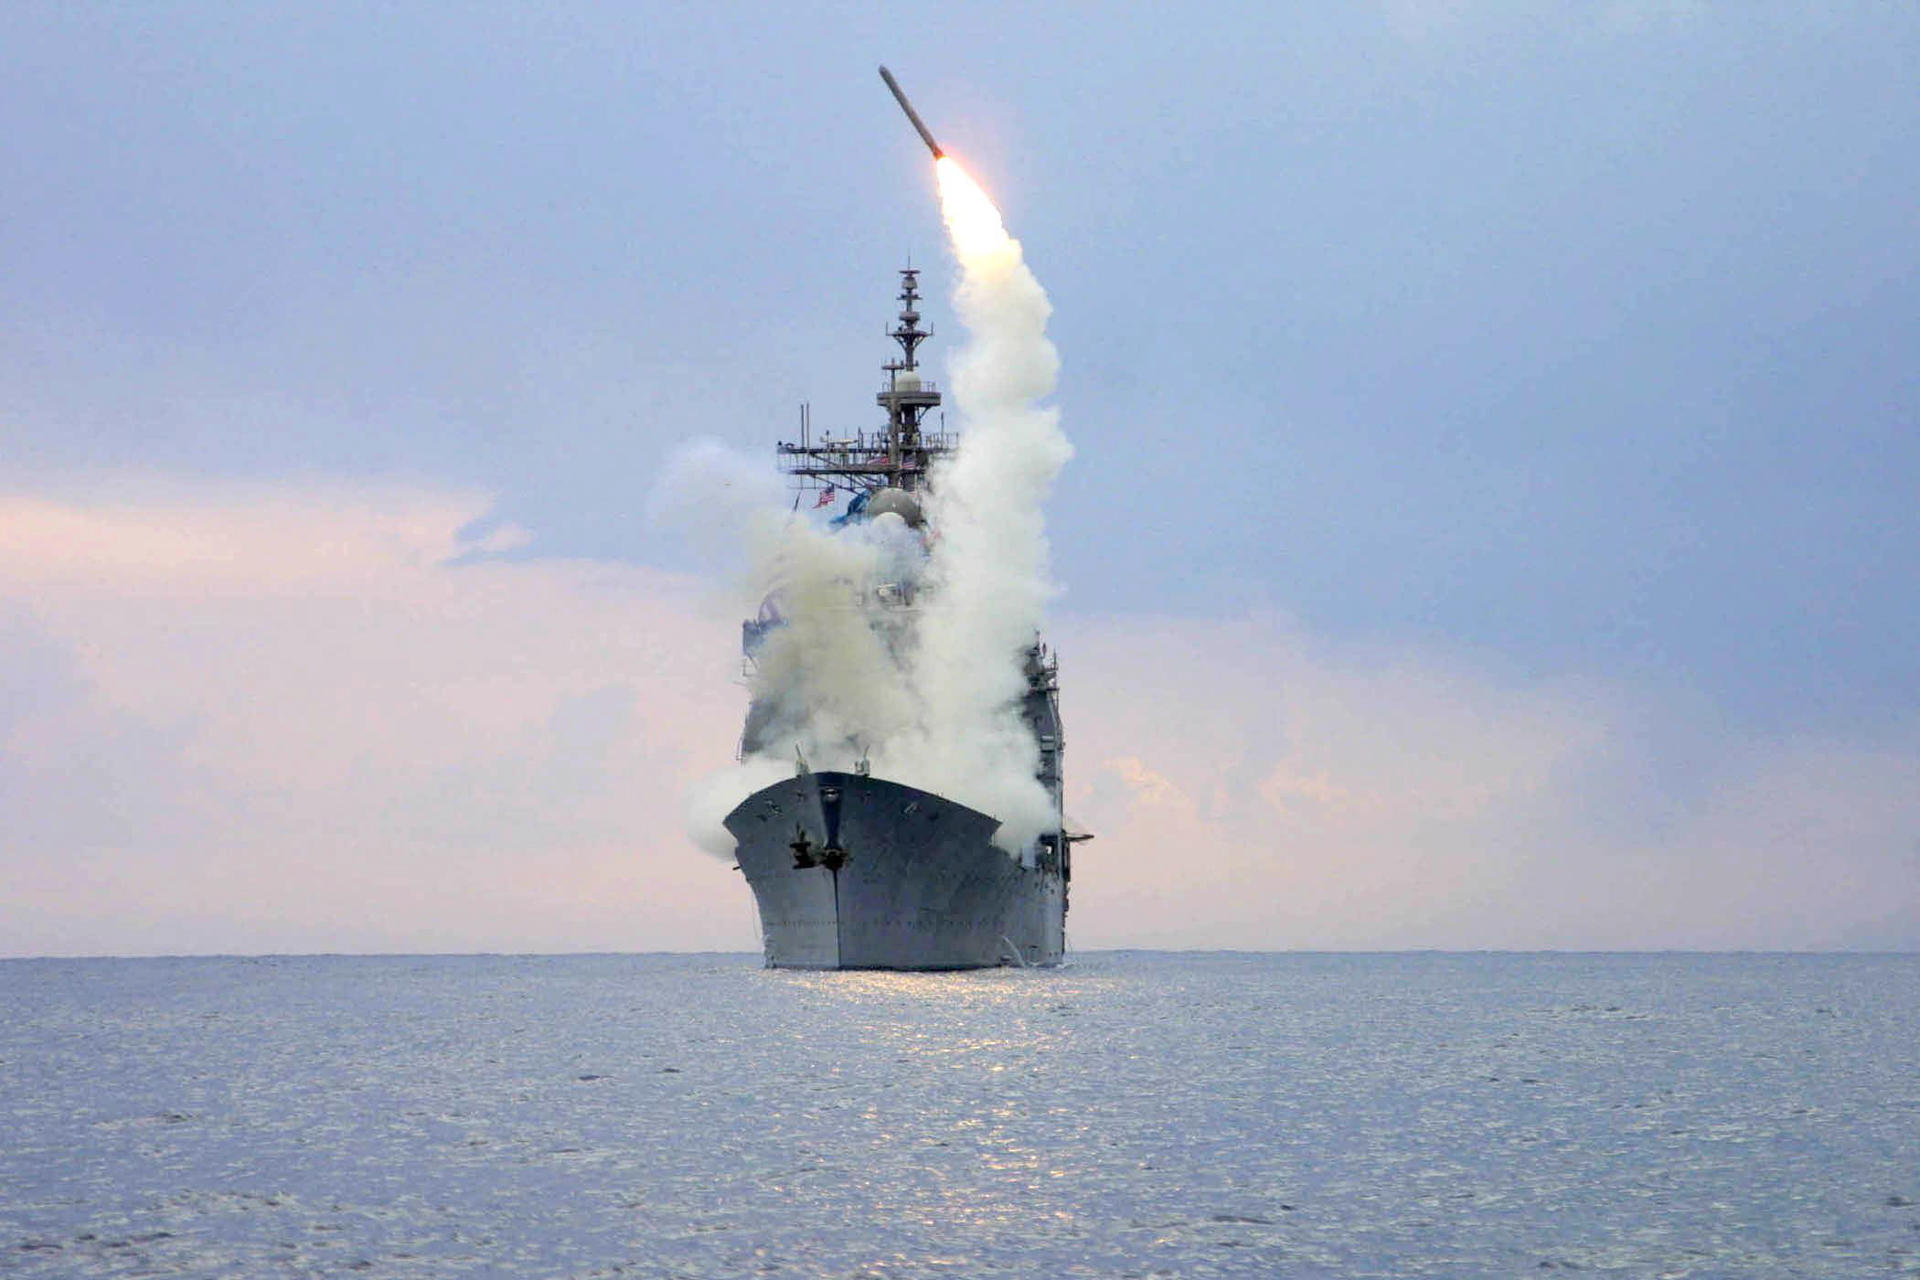 A US Navy handout file picture showing a Tomahawk missile launched from the guided missile cruiser USS Cape St. George in the Mediterranean Sea. EPA/FILE/PHOTO US NAVY / KENNETH MOLL